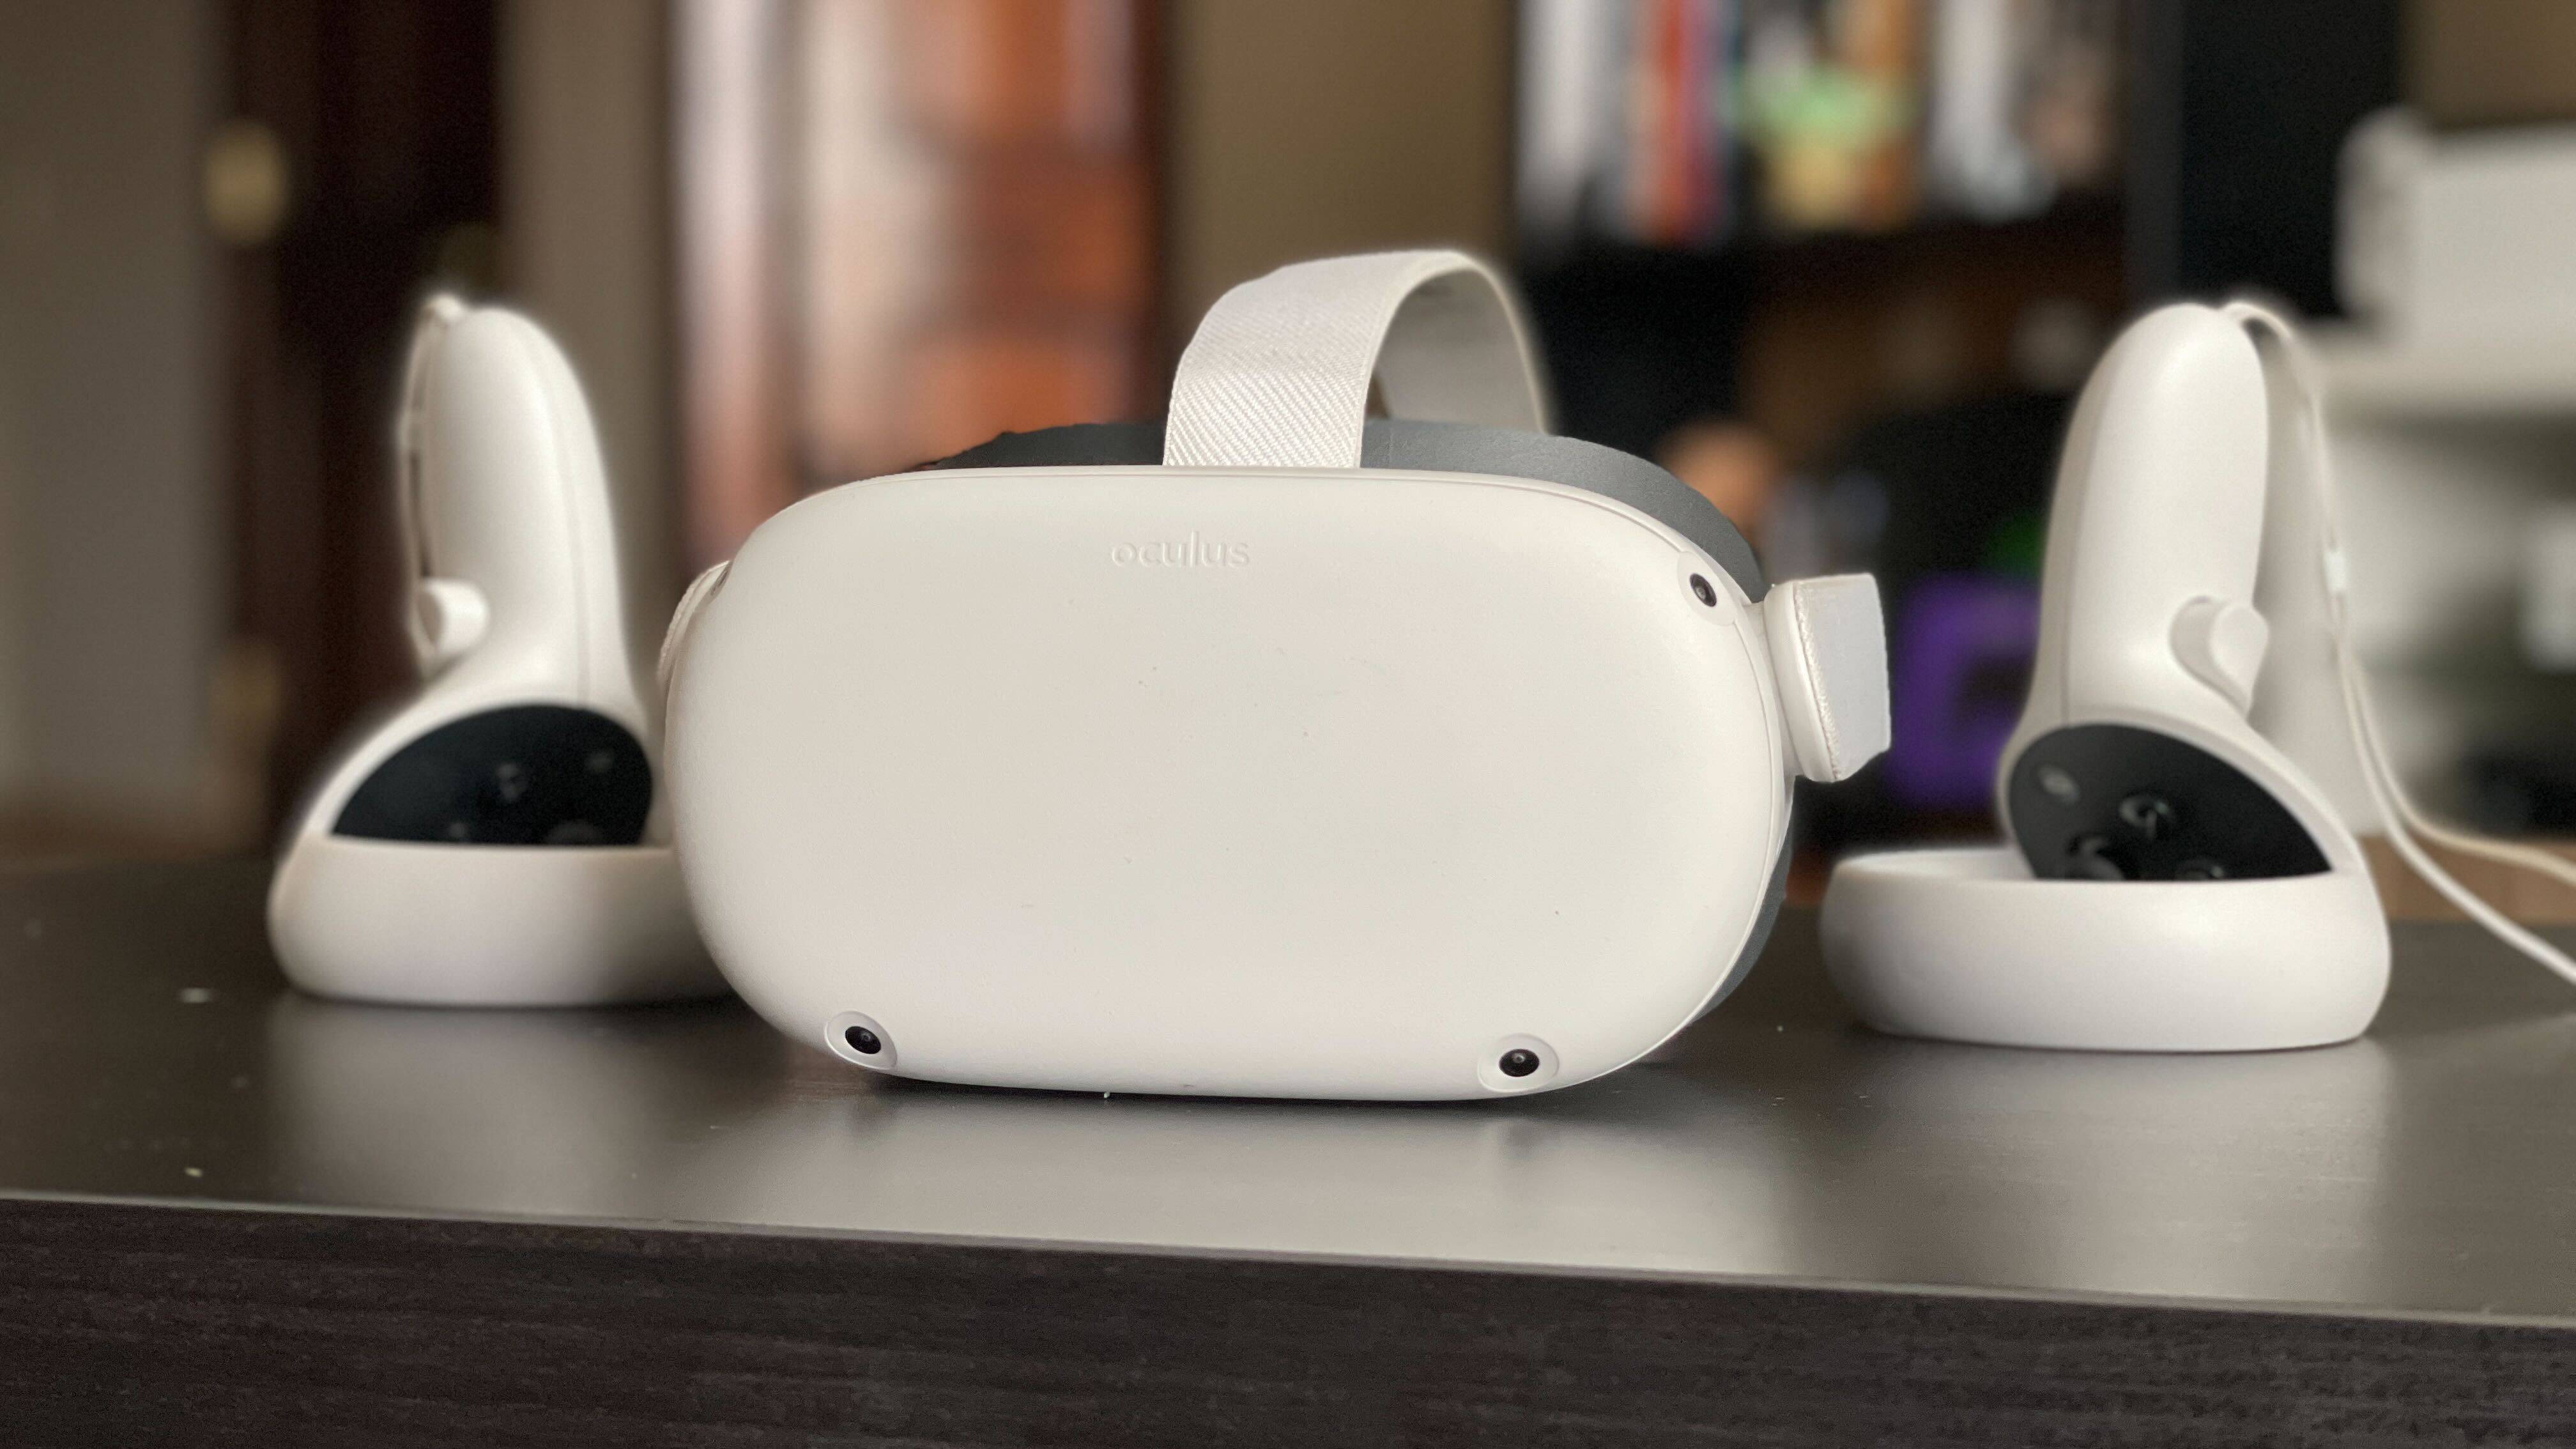 Oculus Quest 2 The best VR headset people | Underscored